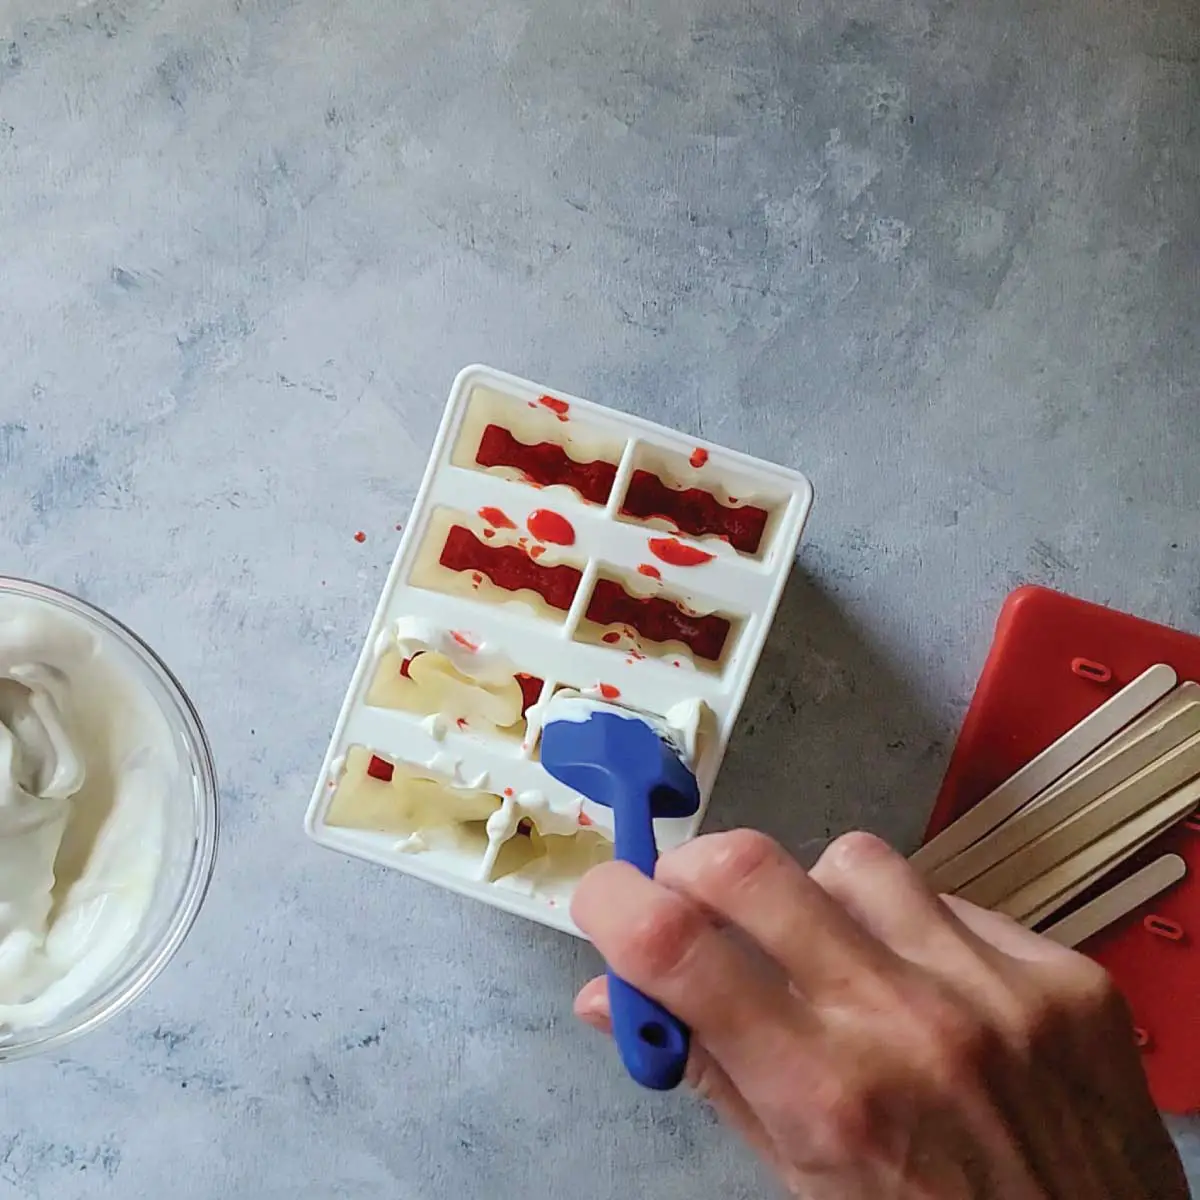 Adding a layer of yogurt on top of the strawberry puree in the silicone popsicle mold.